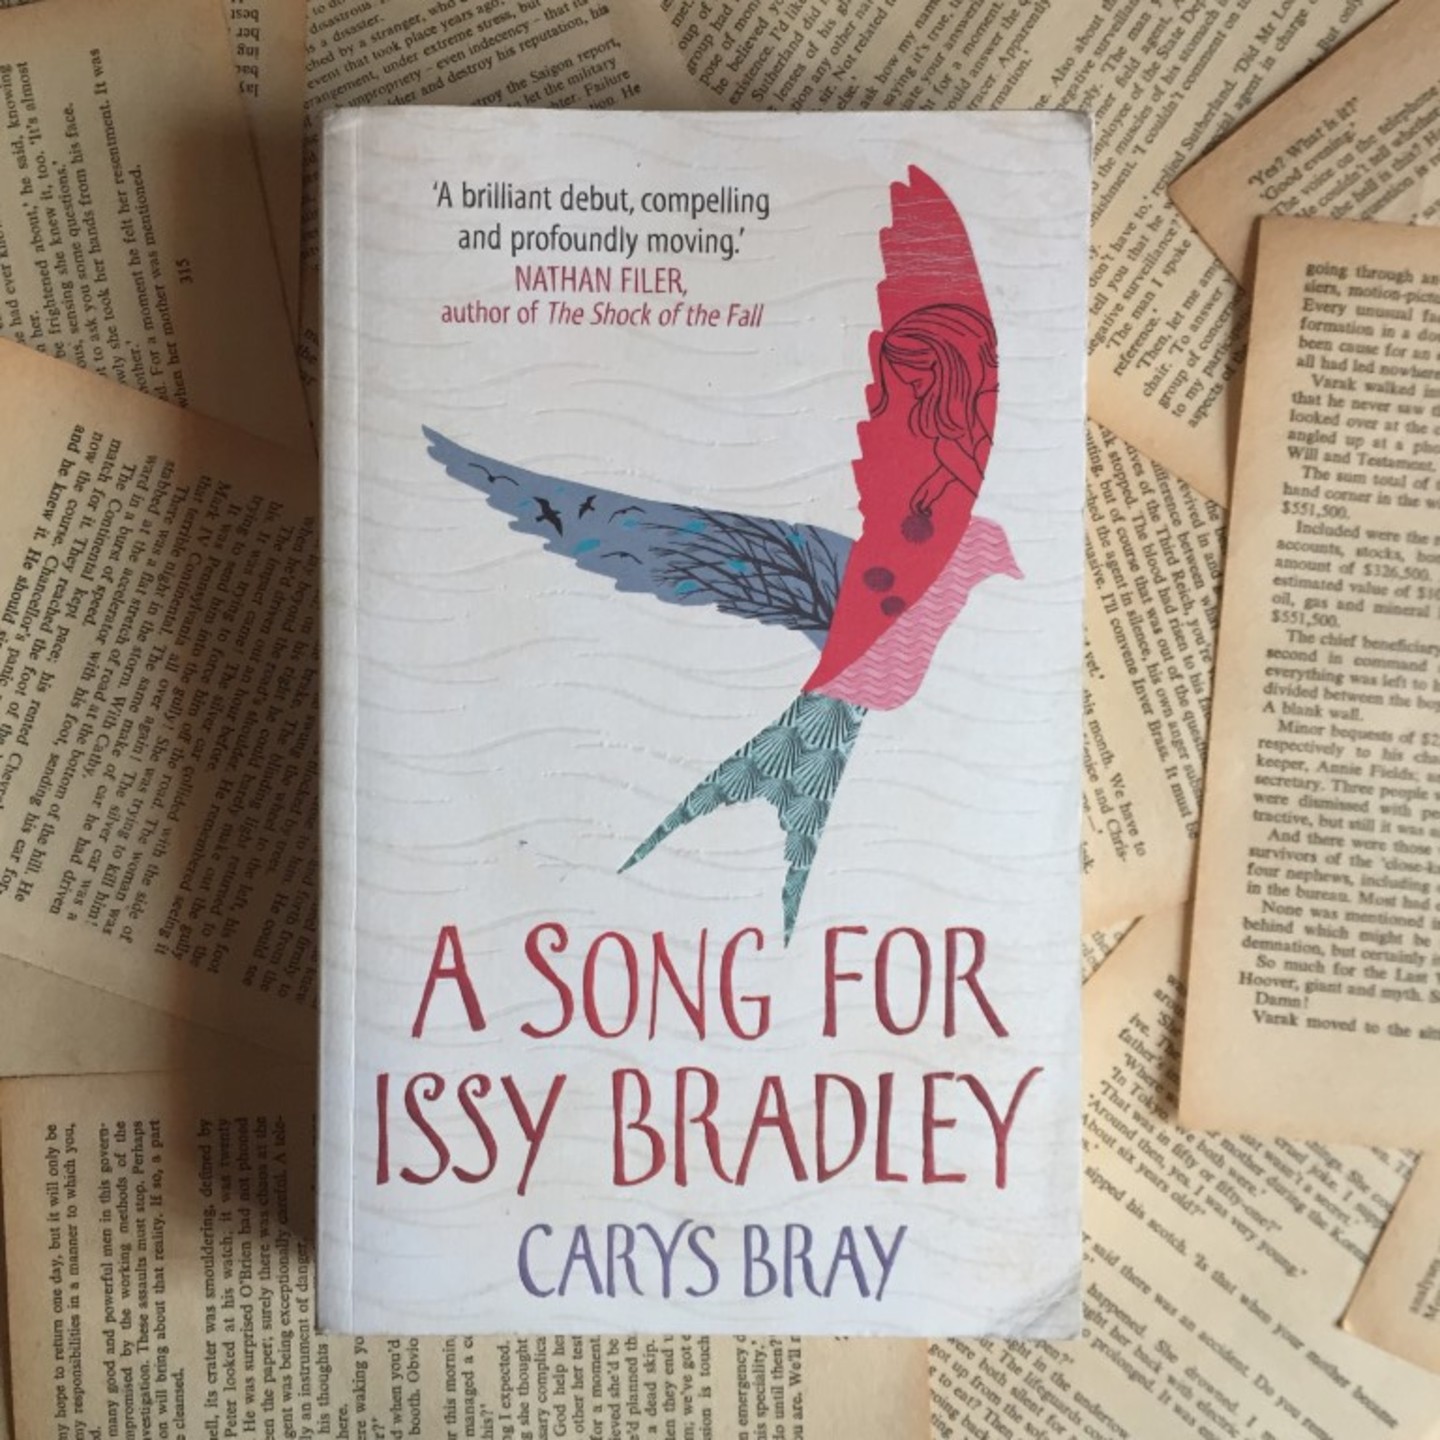 A Song for Issy Bradley by Carys Bray [Paperback]